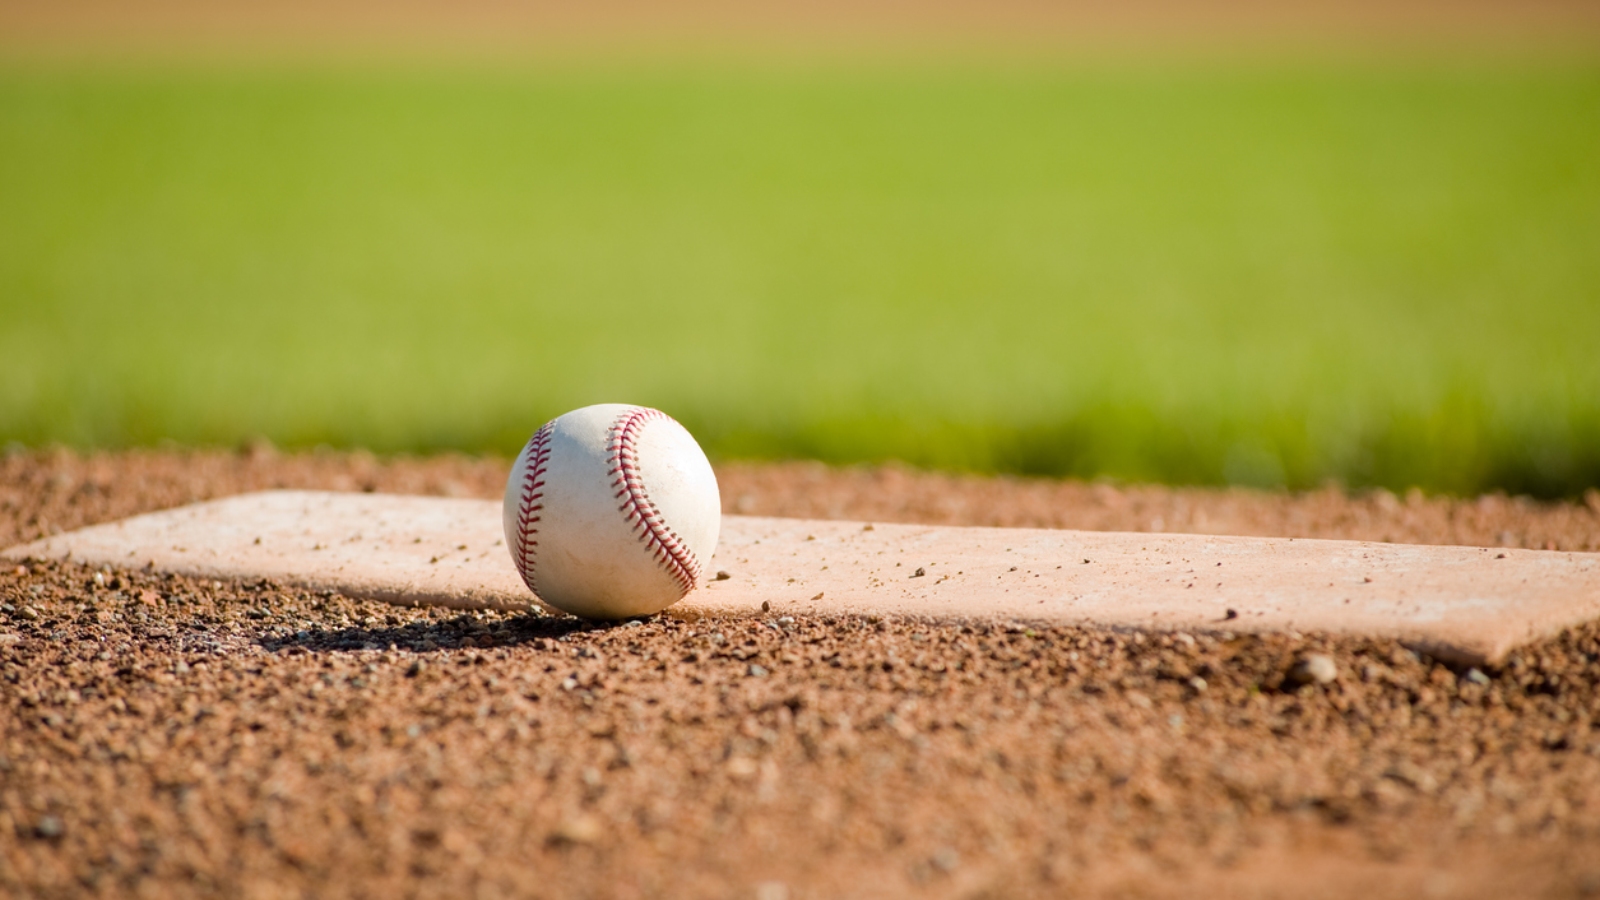 High School Baseball Team Forfeits Title Win Due To Pitch Count Violation [Video]